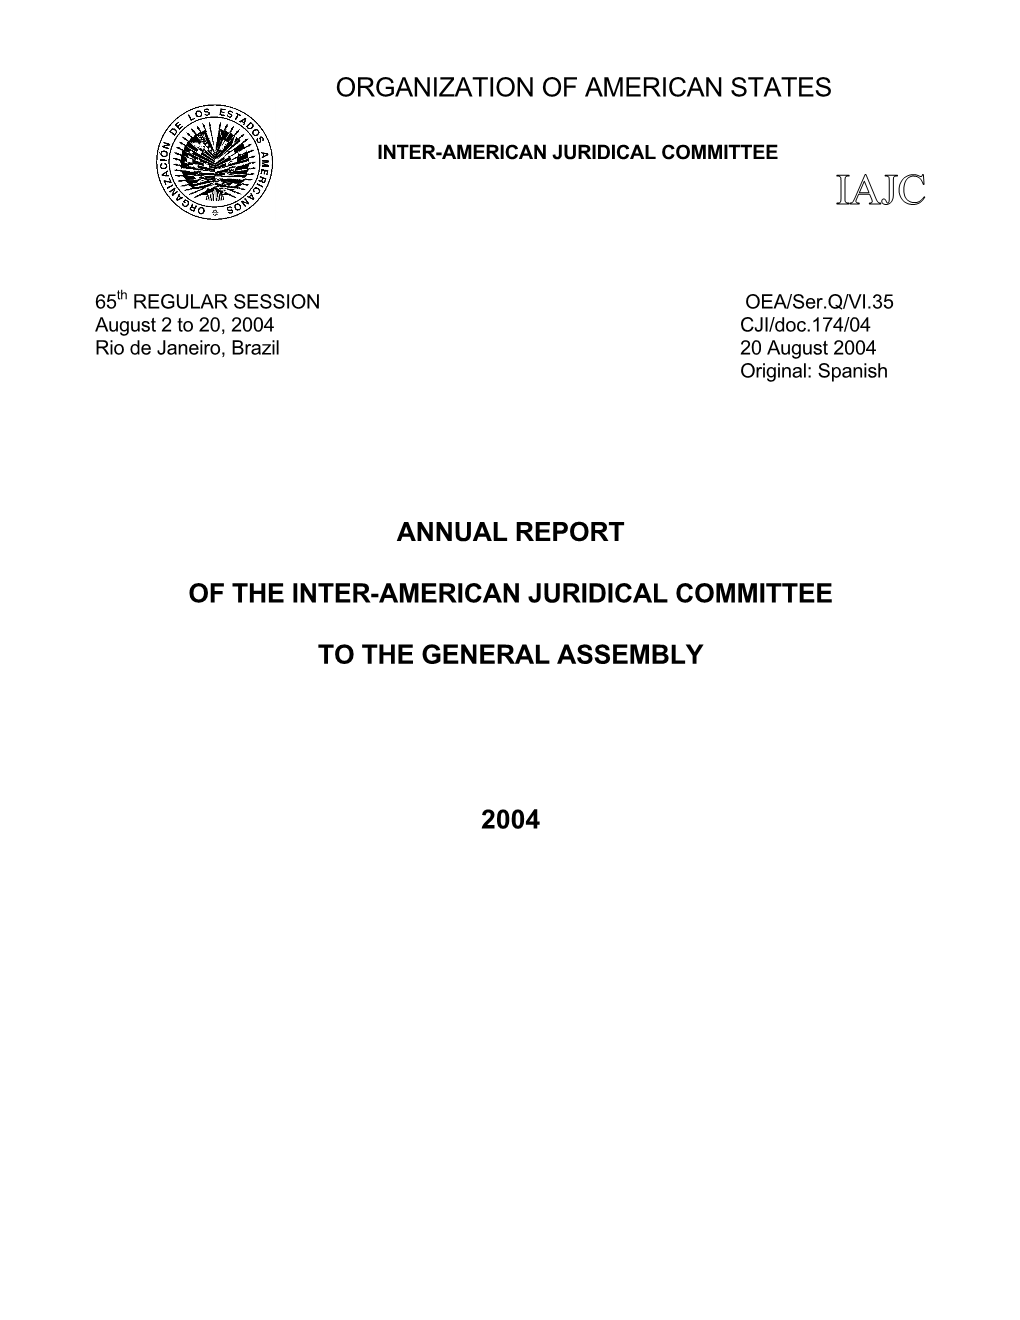 Inter-American Juridical Committee